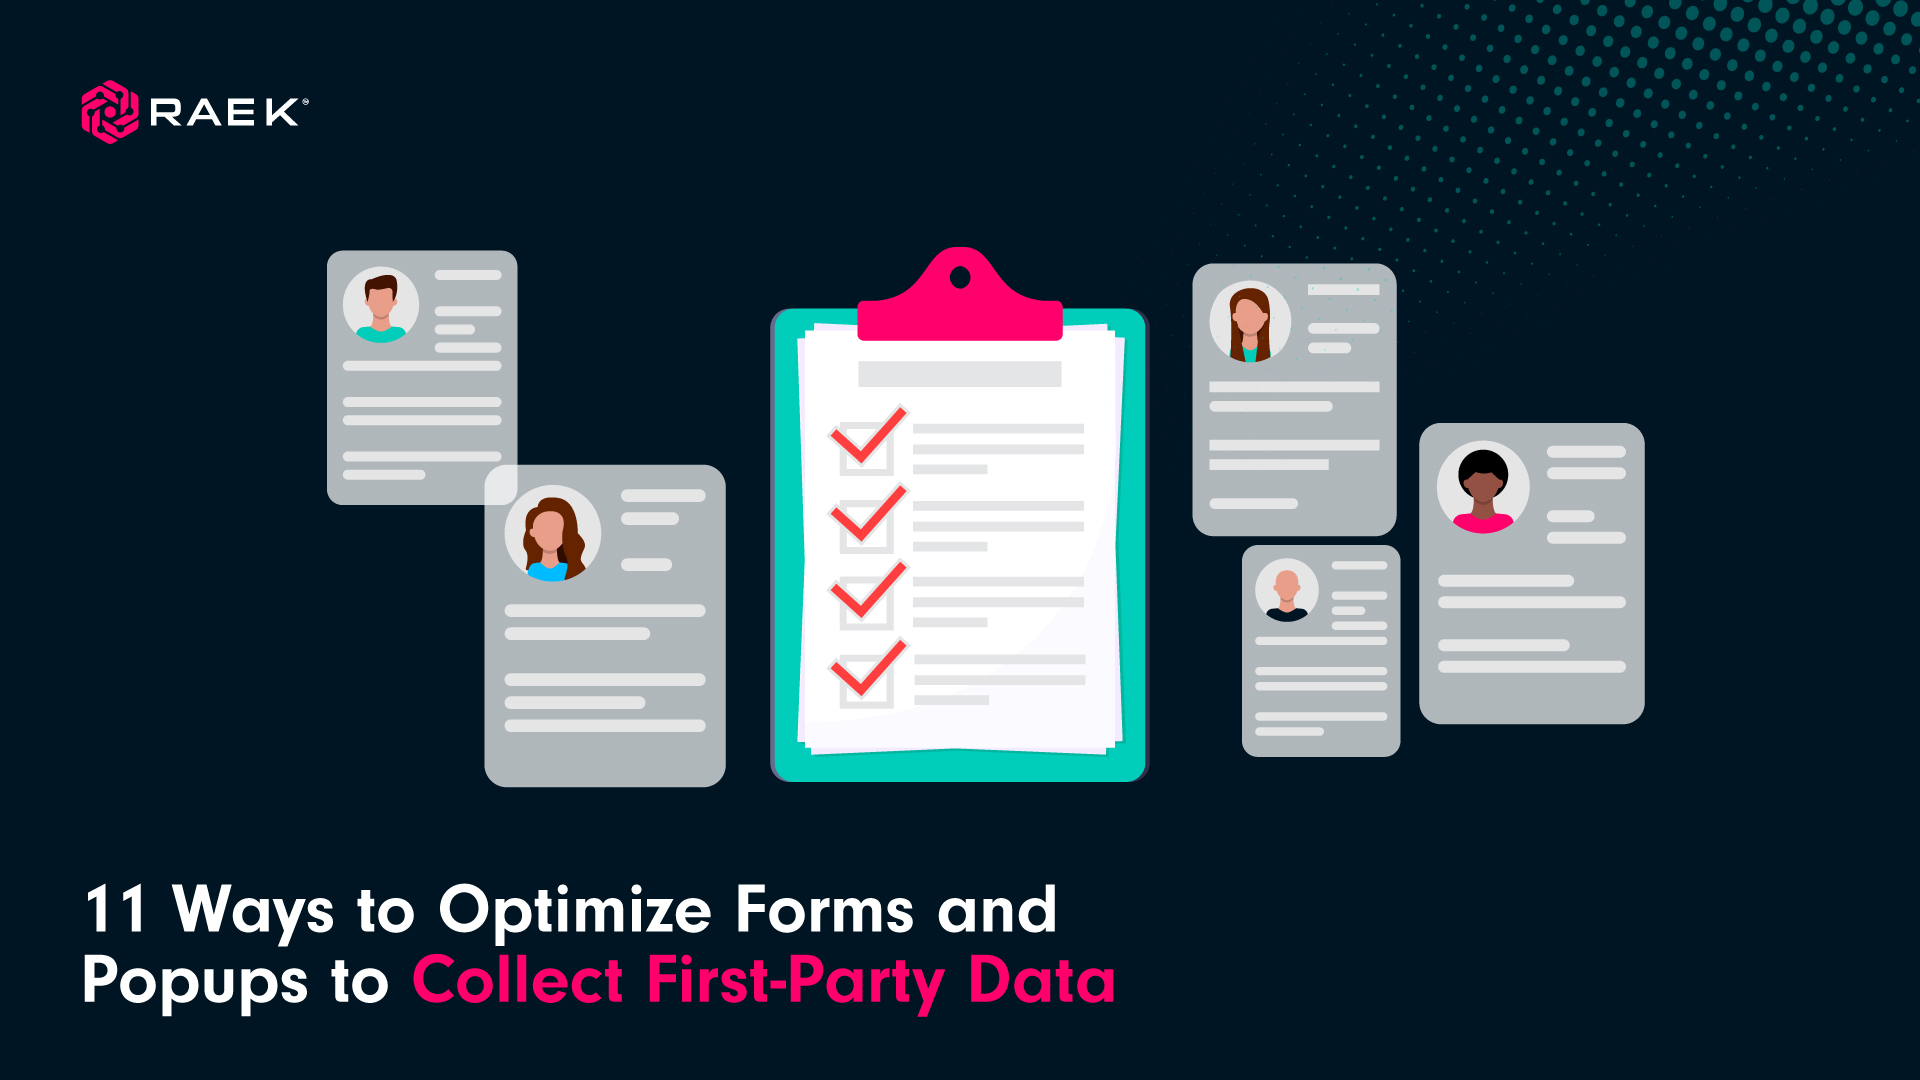 11 Ways to Optimize Forms and Popups to Collect First-Party Data